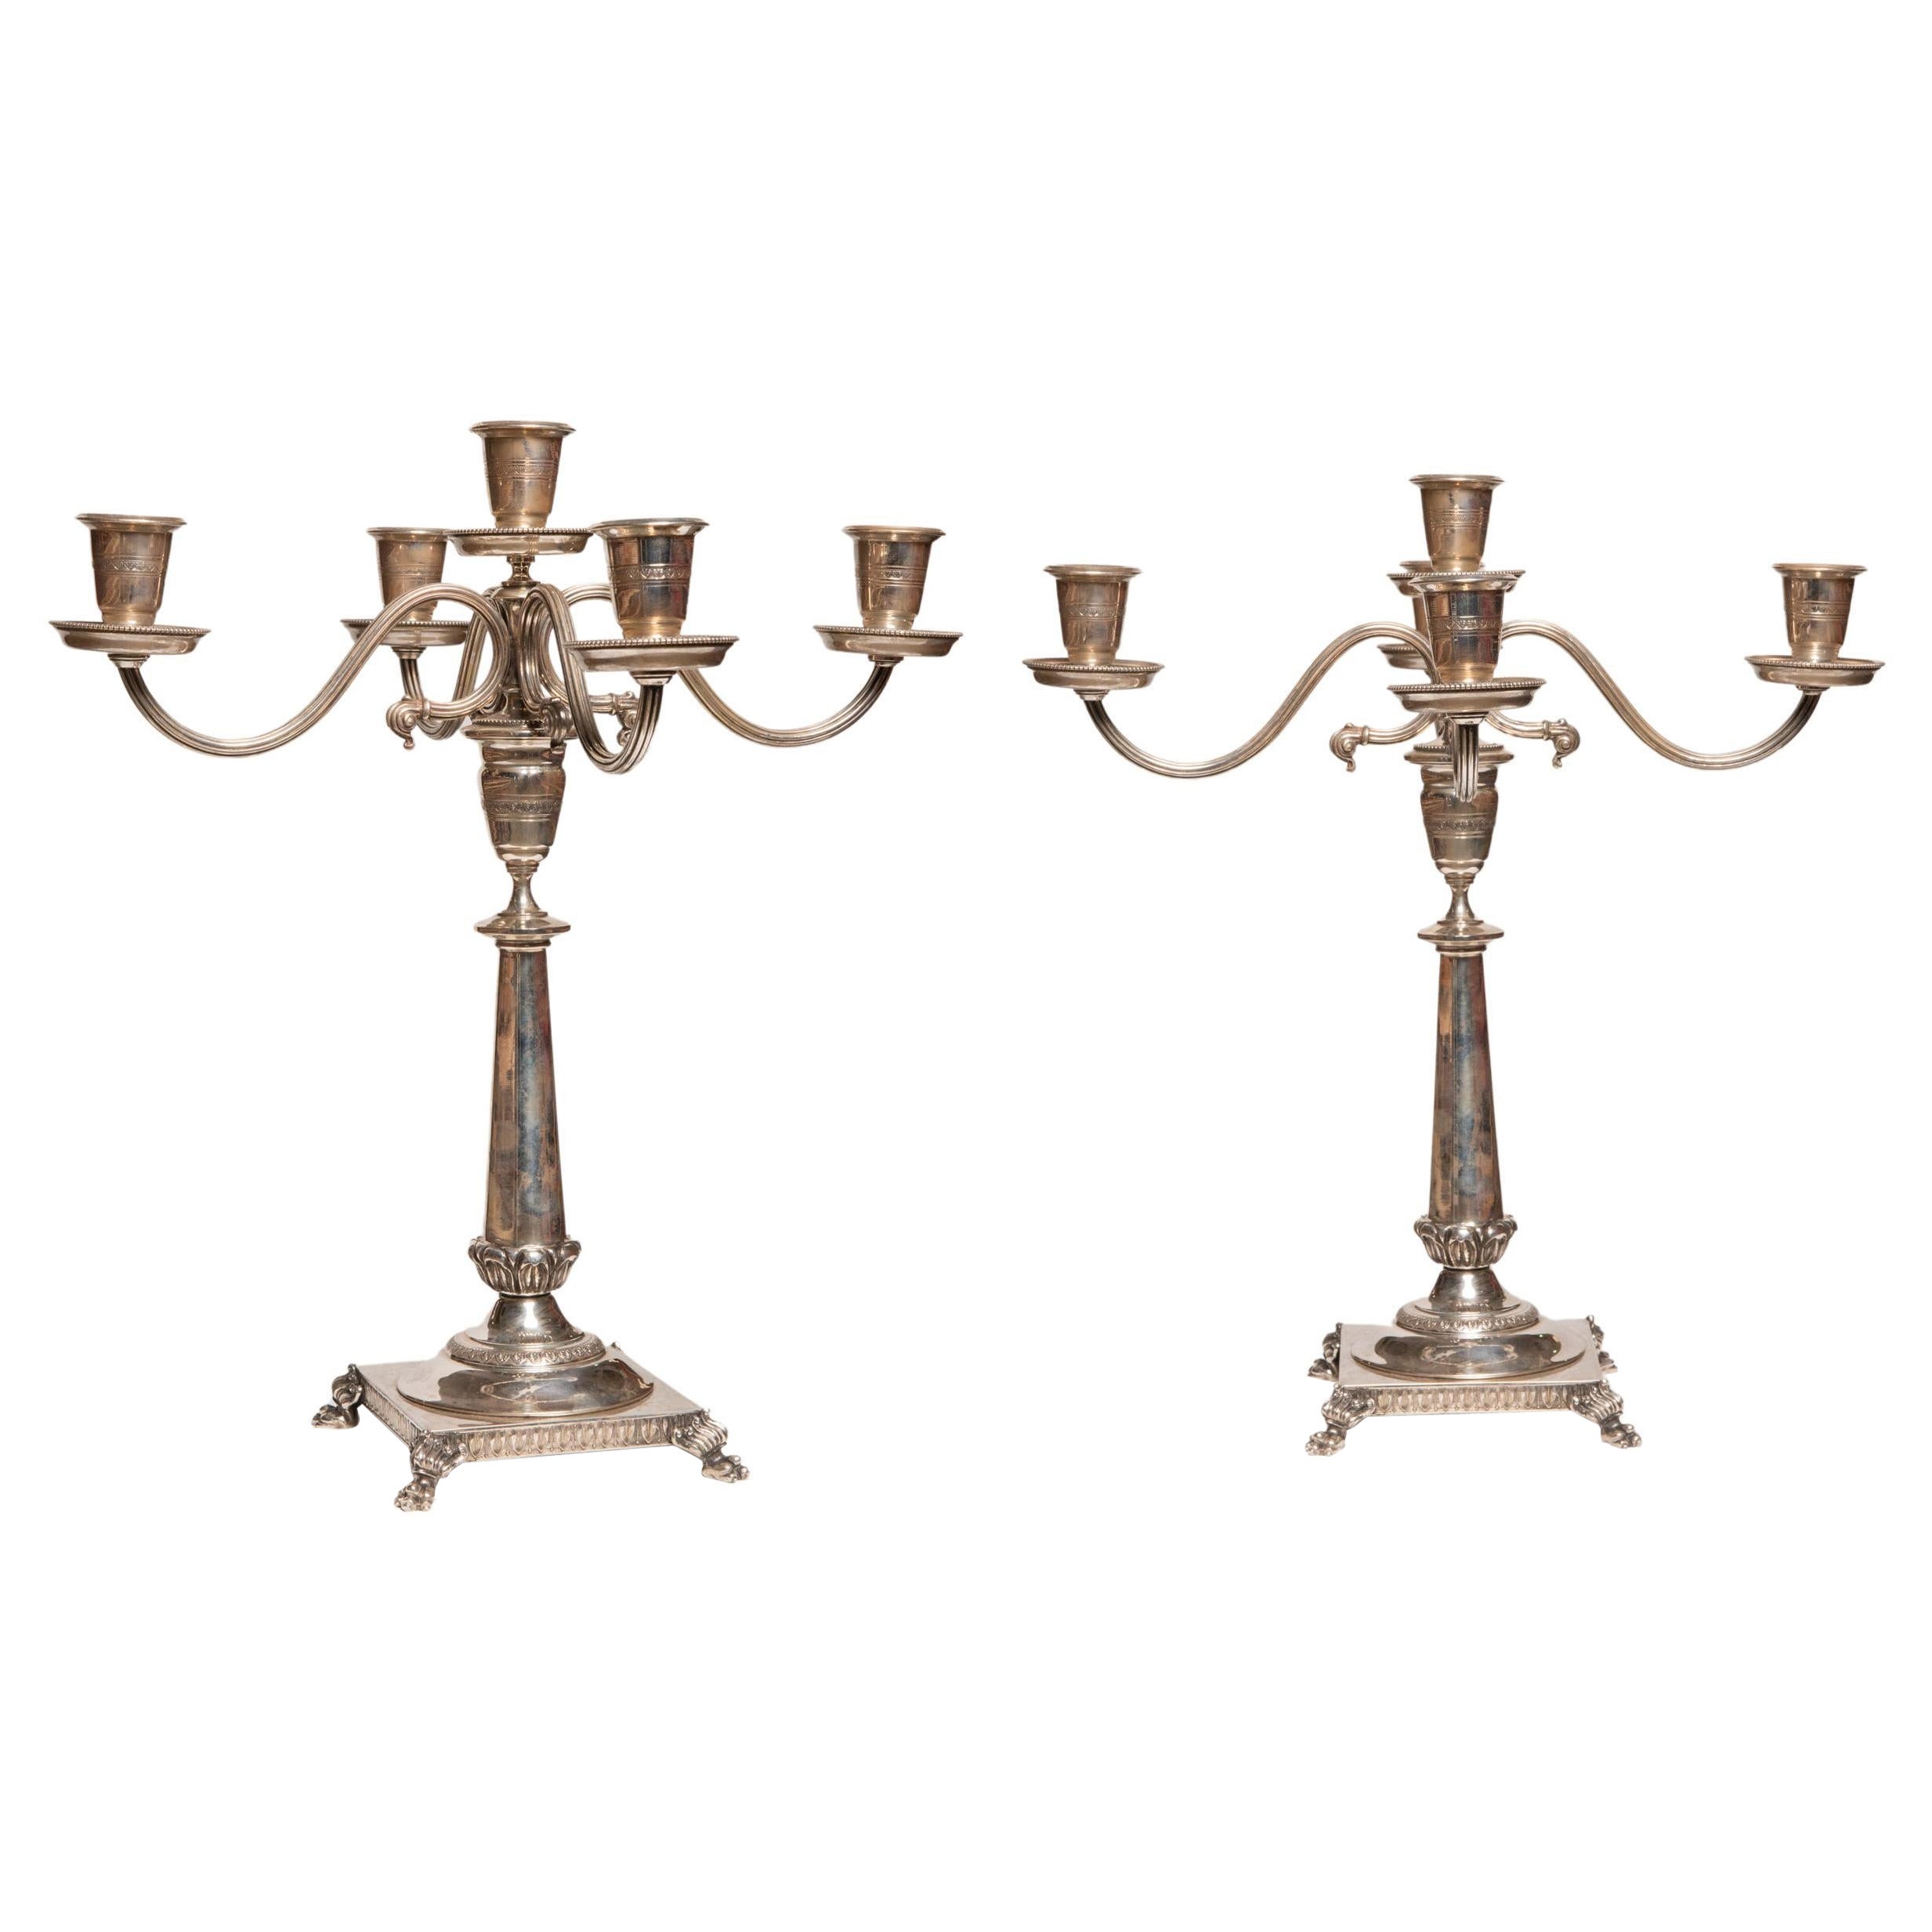 Pair of Silver Italian Candelabra or Candlestick